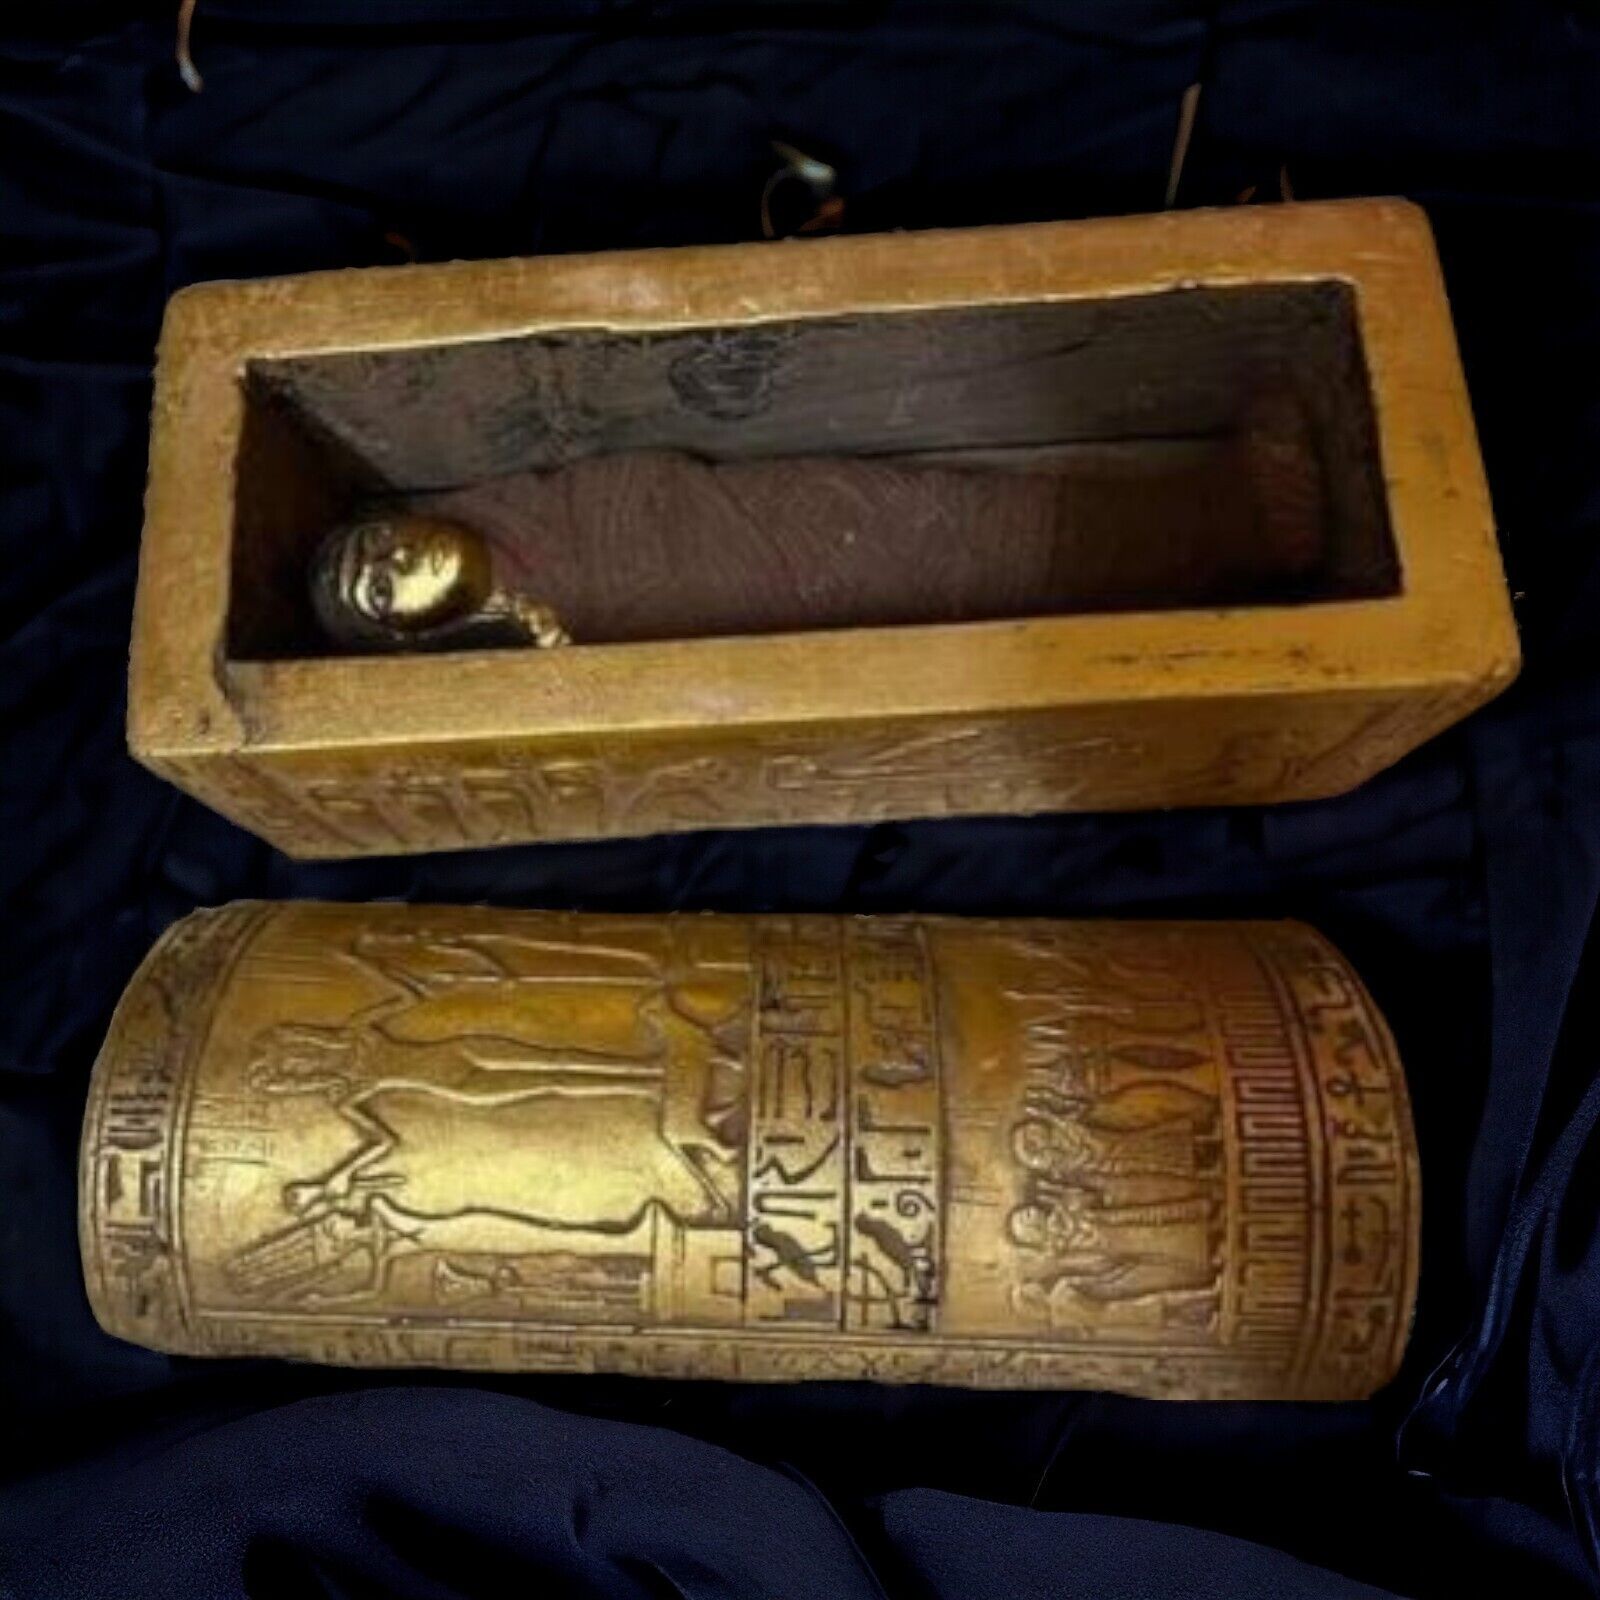 Exquisite Vintage Jewelry Box w/ Egyptian Gods | Pharaonic Mummy | Handcrafted